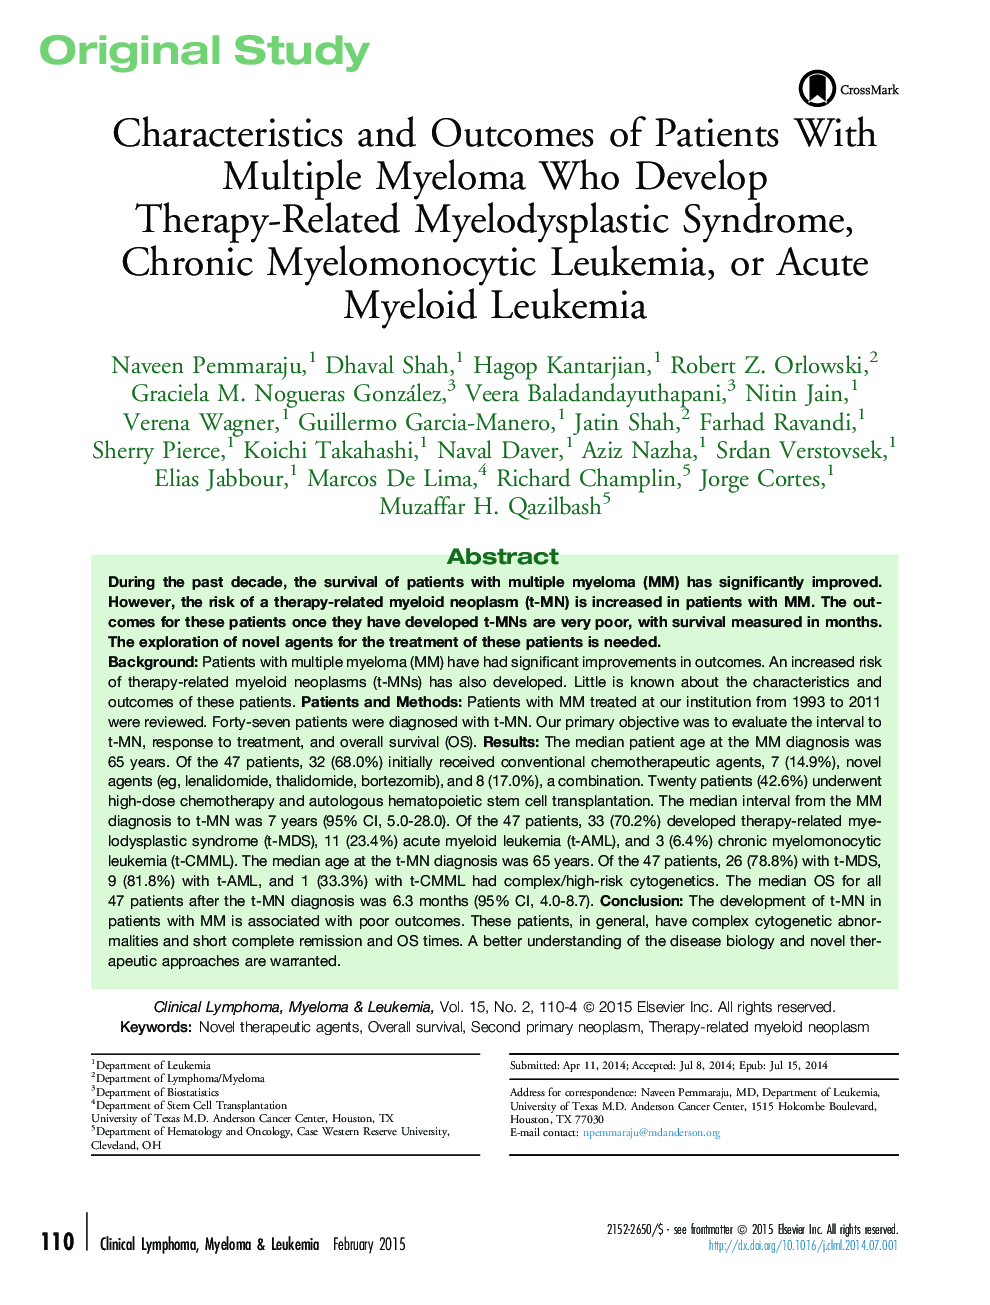 Characteristics and Outcomes of Patients With Multiple Myeloma Who Develop Therapy-Related Myelodysplastic Syndrome, Chronic Myelomonocytic Leukemia, or Acute Myeloid Leukemia